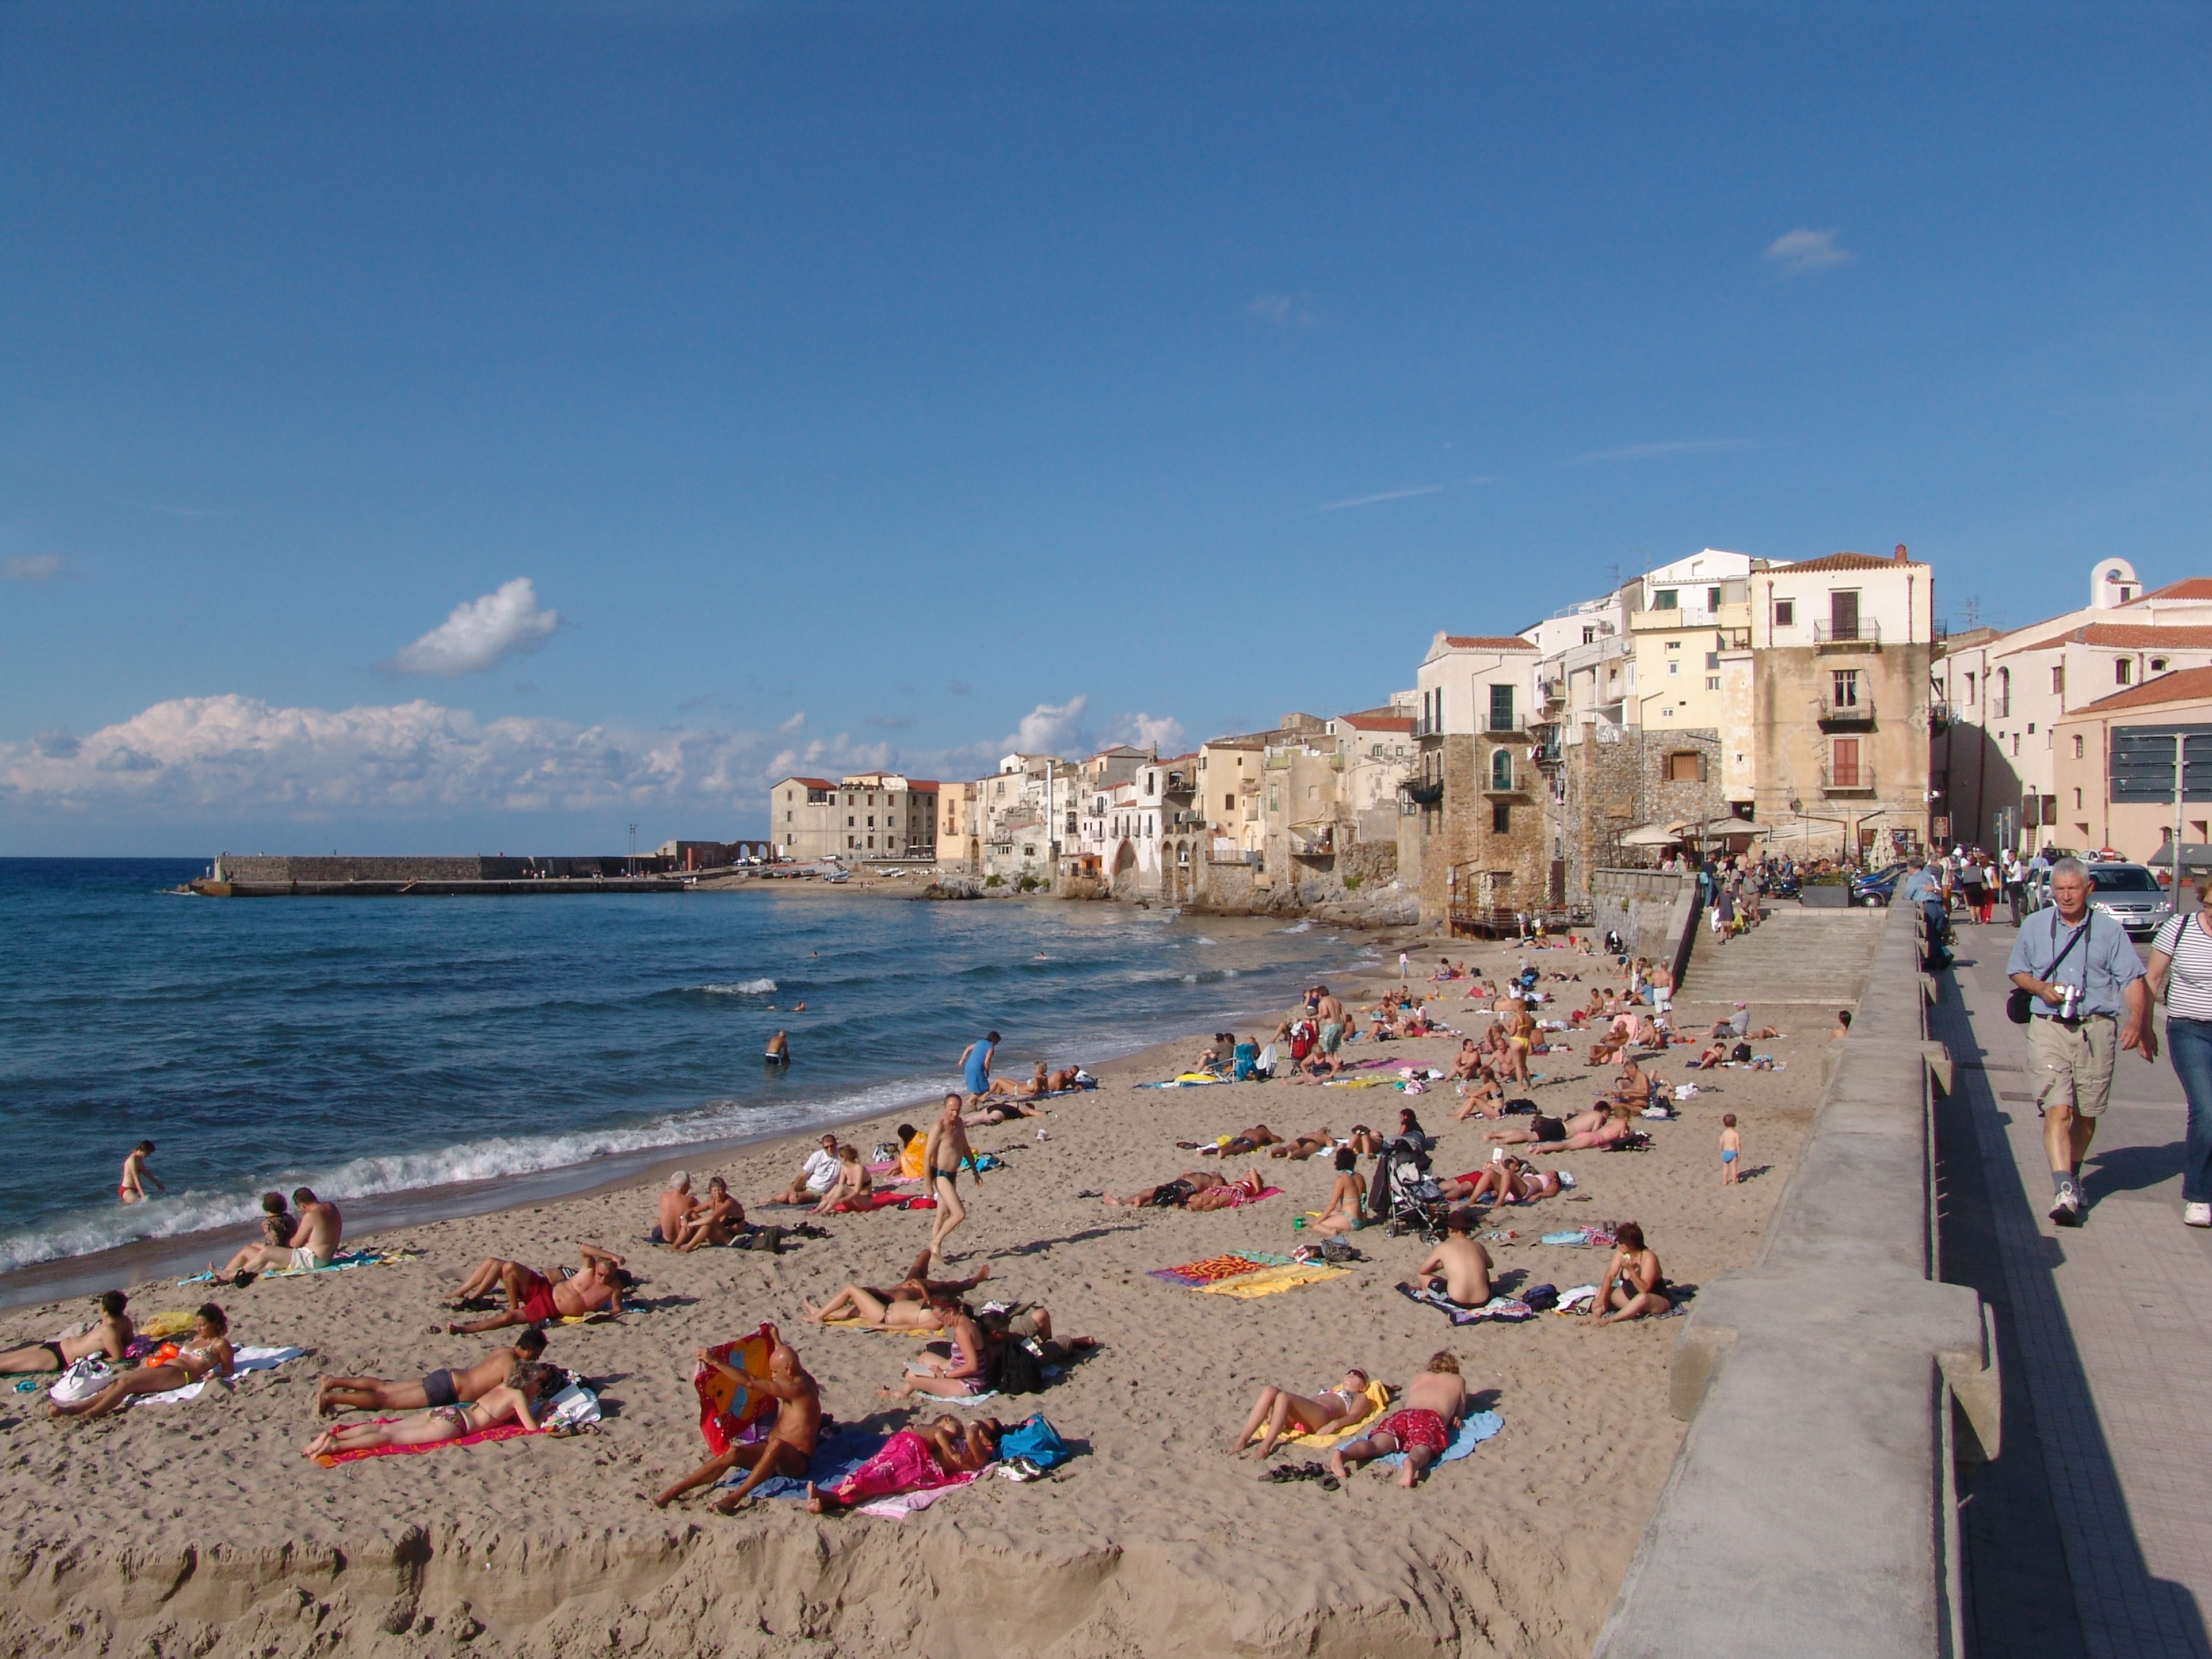 Information about Cefalù in Sicily, Italy.